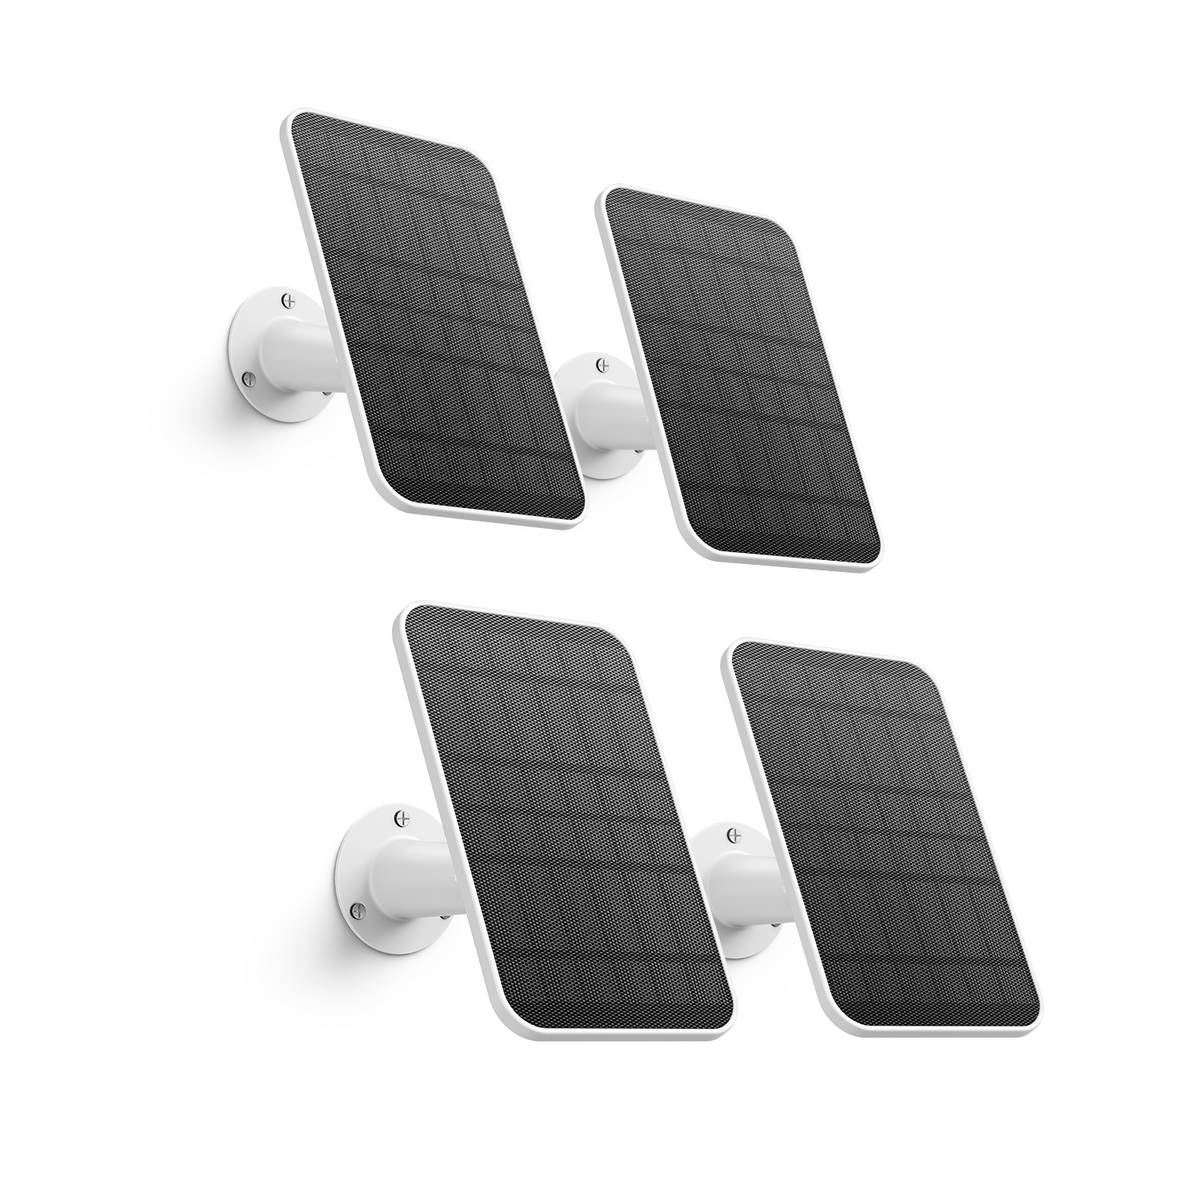 eufyCam Solar Panel Charger (4 Pack)